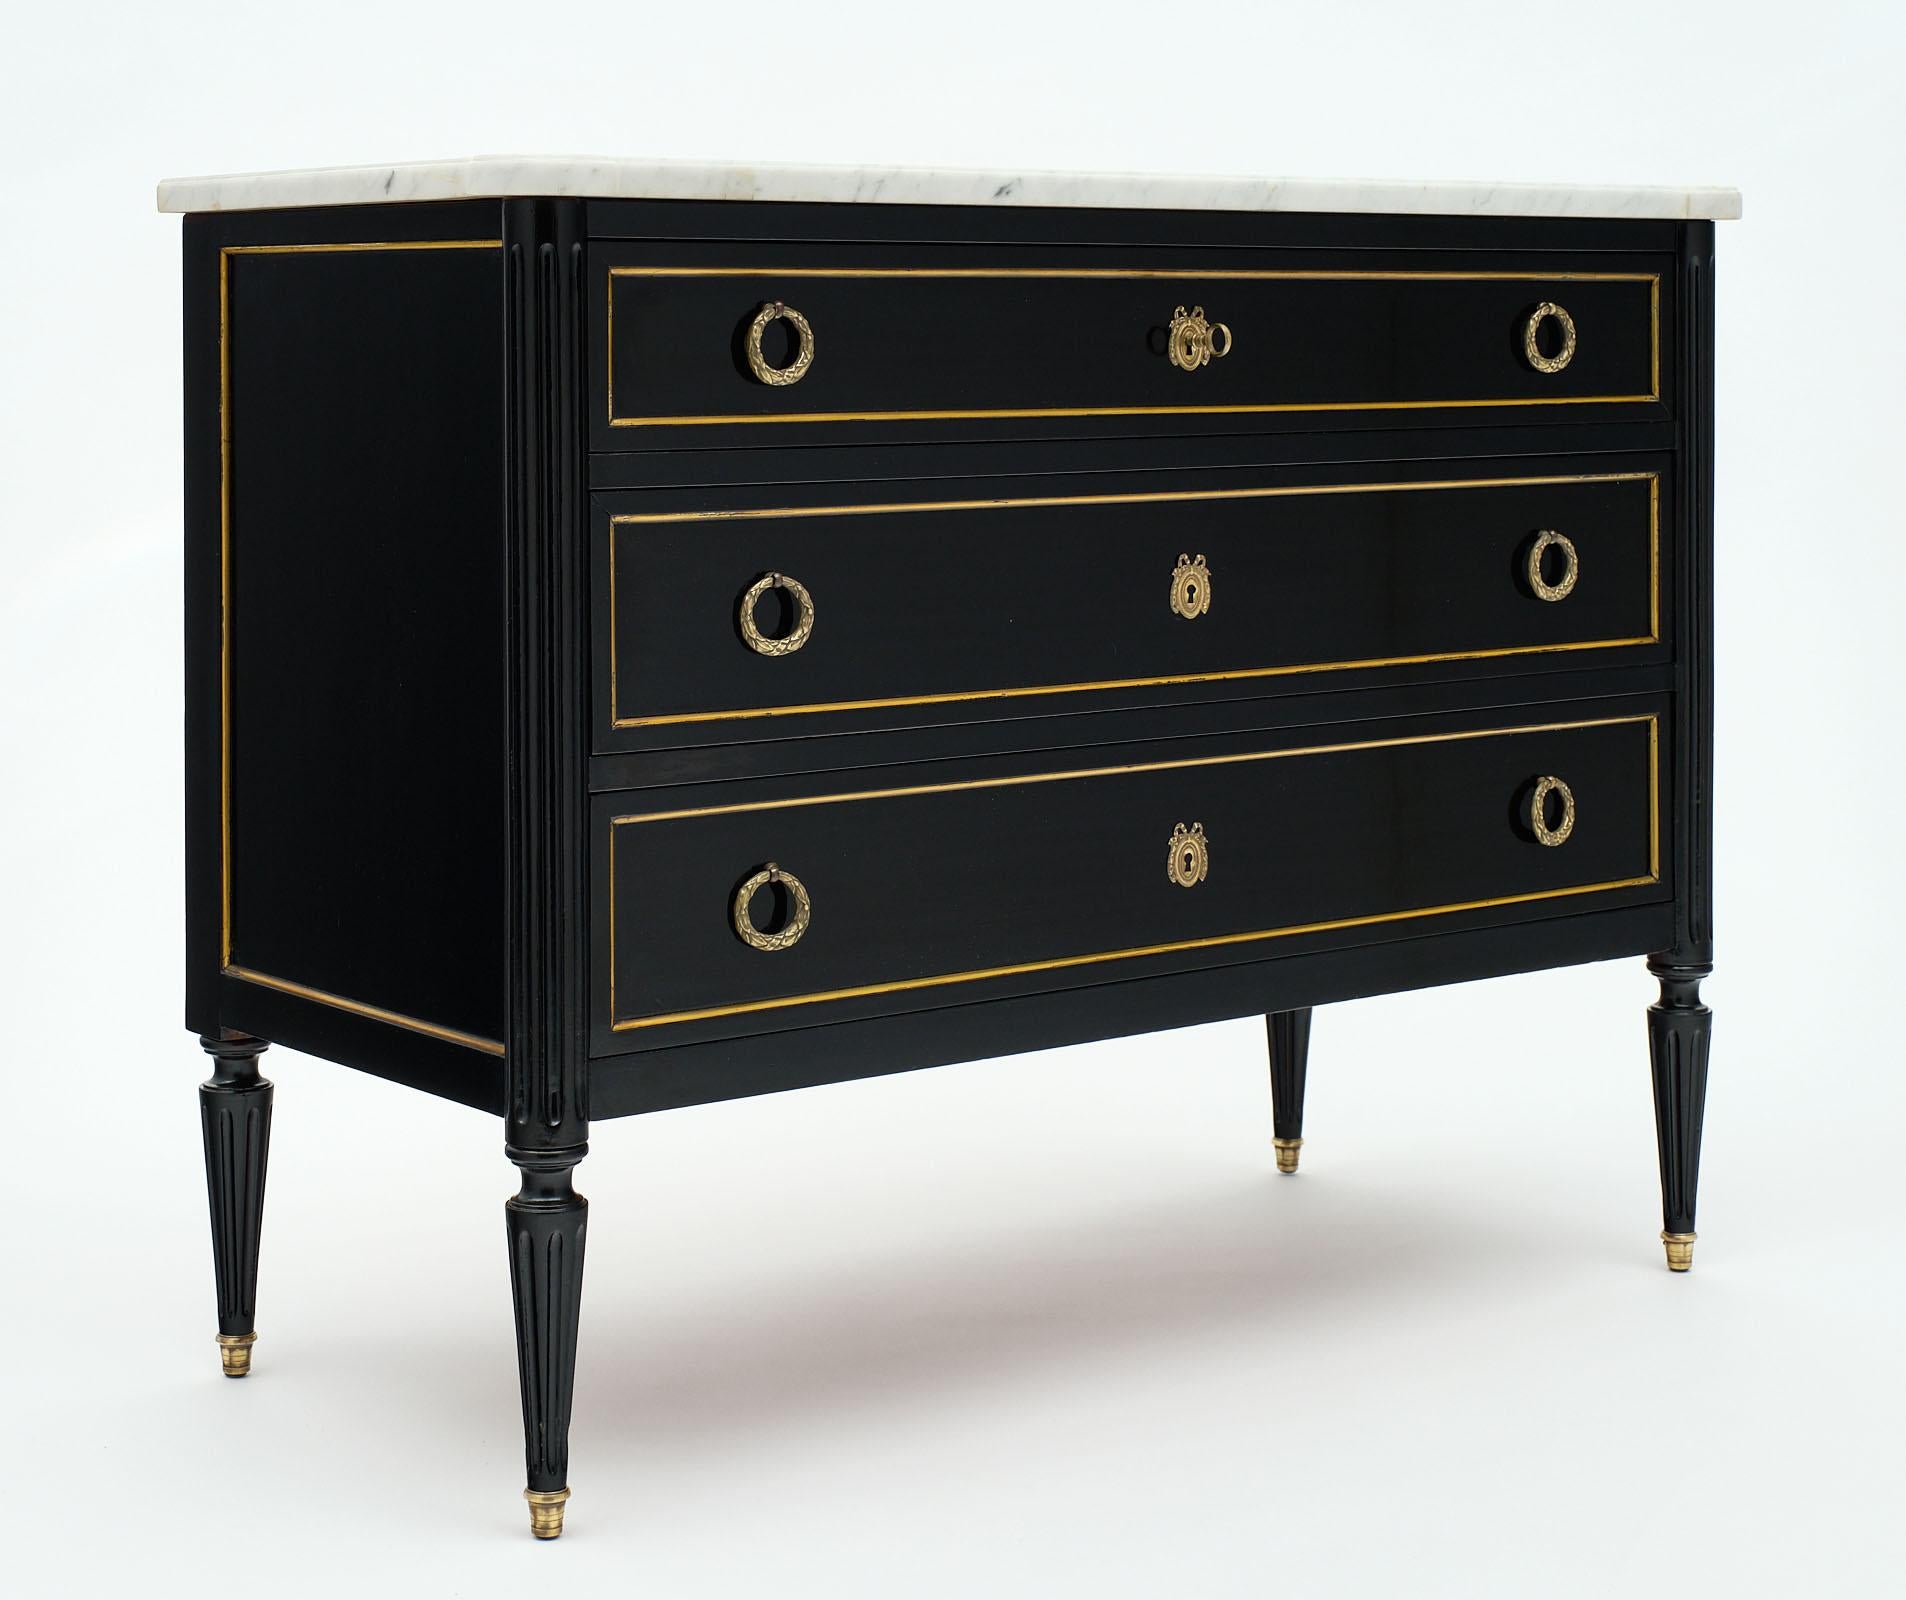 Louis XVI style antique chest of drawers made of mahogany and finished with an ebonized French polish for luster. The gilt brass trims and hardware throughout add an elegant touch. We love the tapered legs and proportions. There are three dovetailed